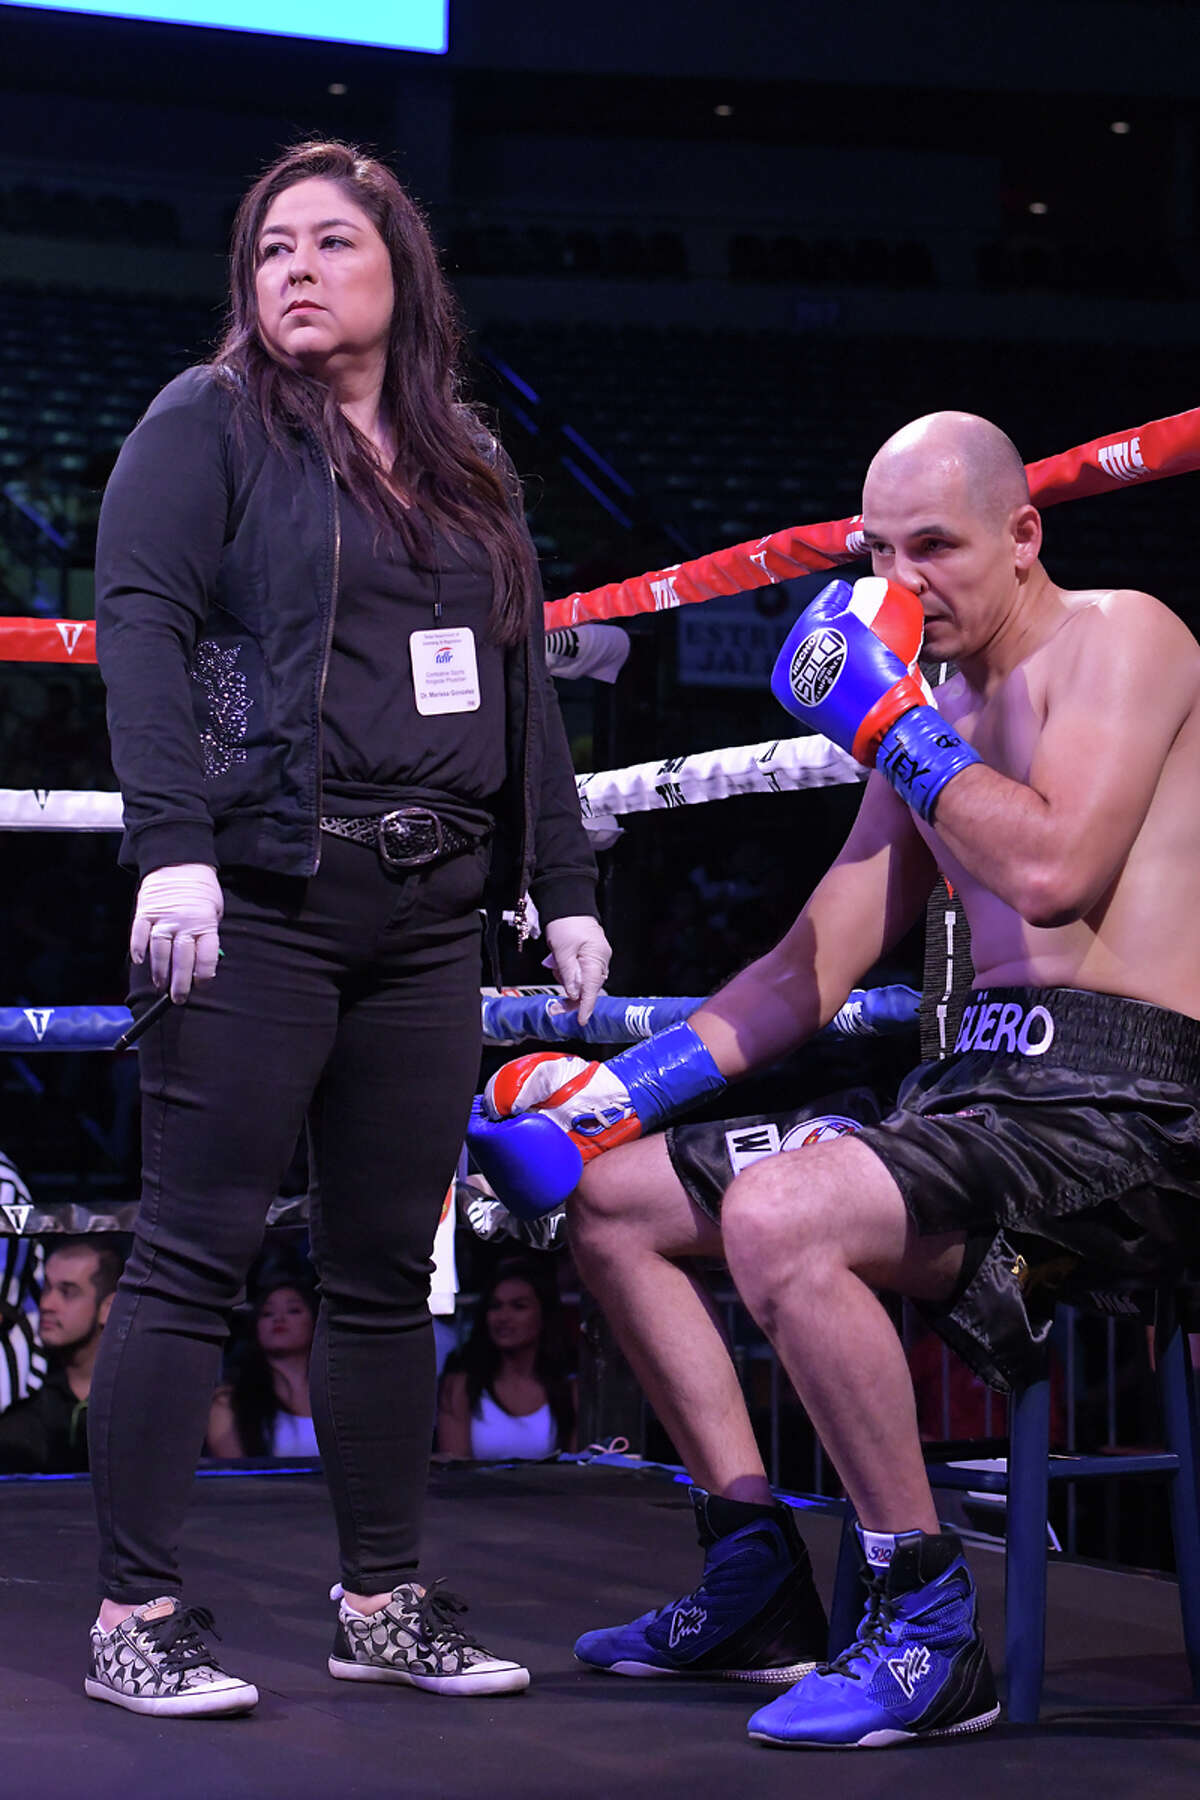 Photos Laredo boxing fans come out to Fight Fest 19 at Sames Auto Arena